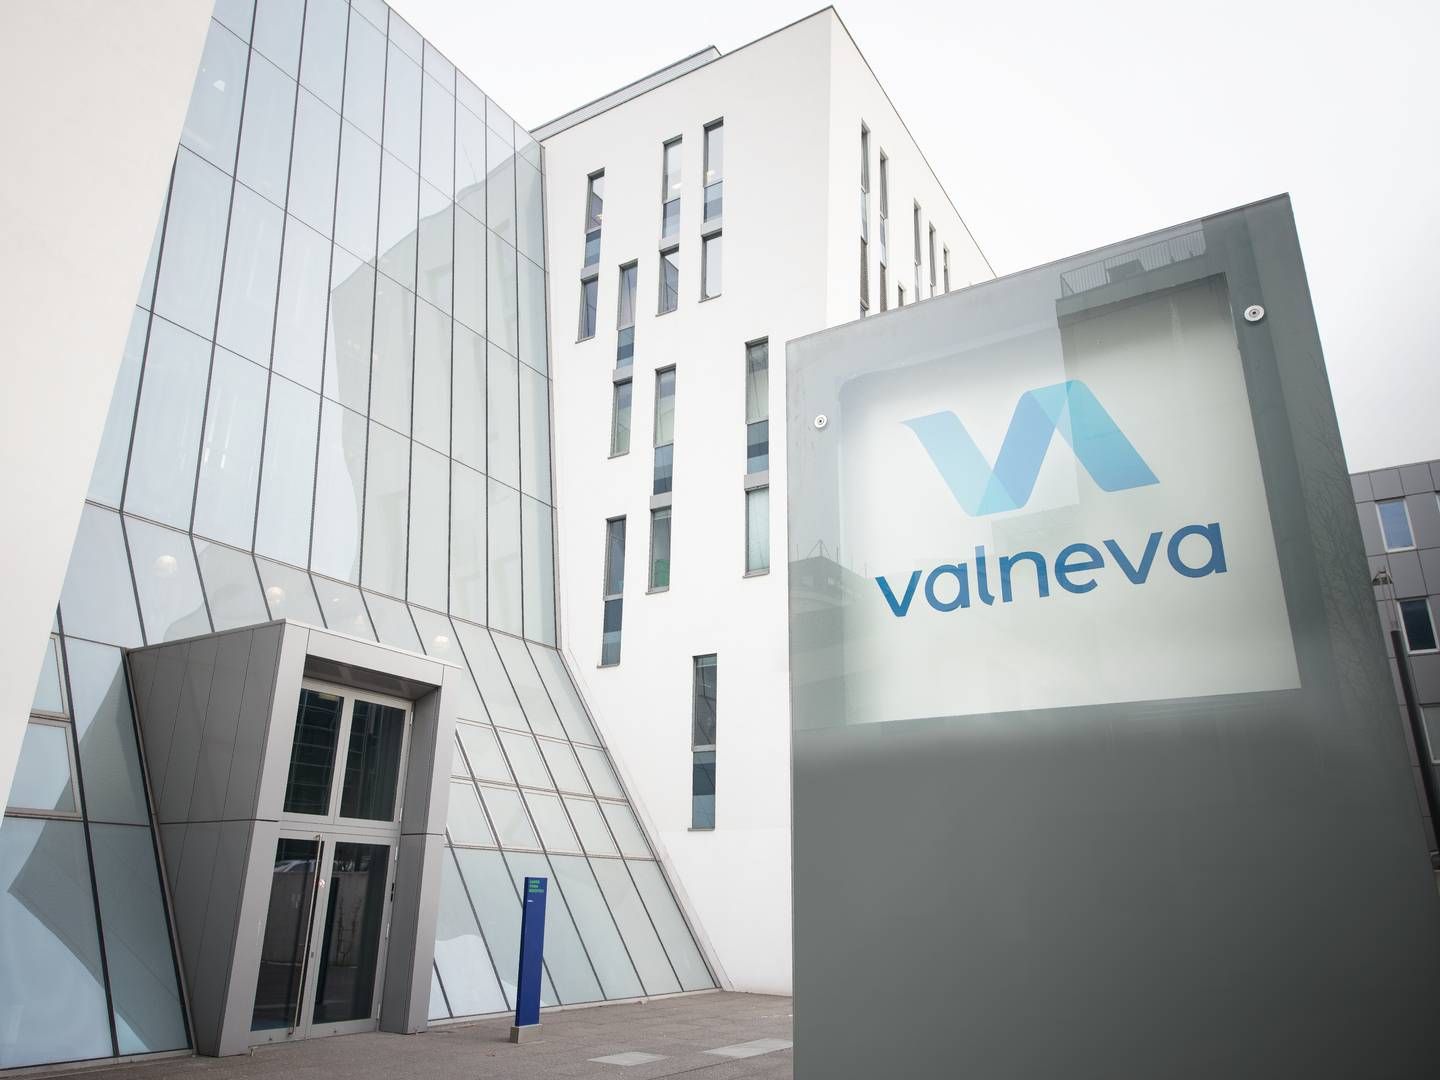 The FDA has extended the date by which the agency will make its decision on whether to approve Valneva's vaccine against the chikungunya virus. | Photo: Valneva / Pr